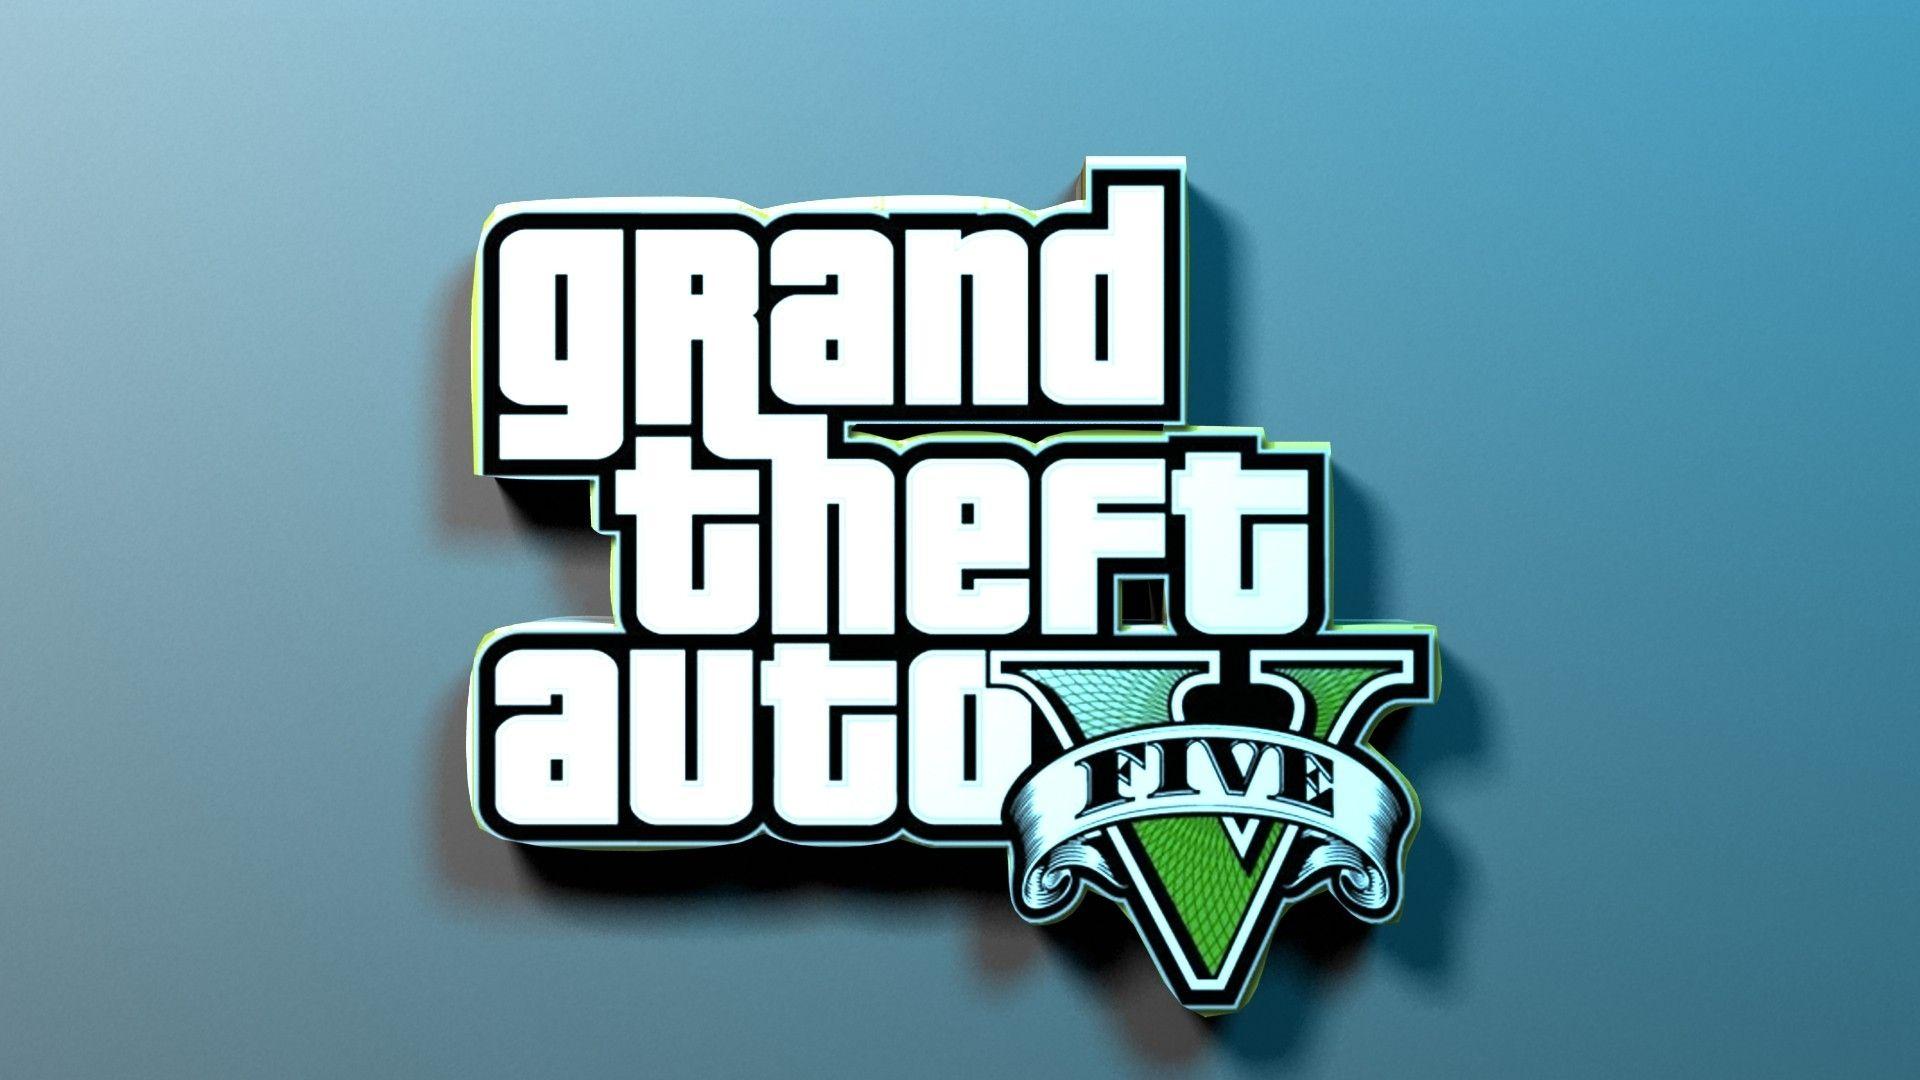 Download Wallpaper 1920x1080 gta, grand theft auto game, shadow